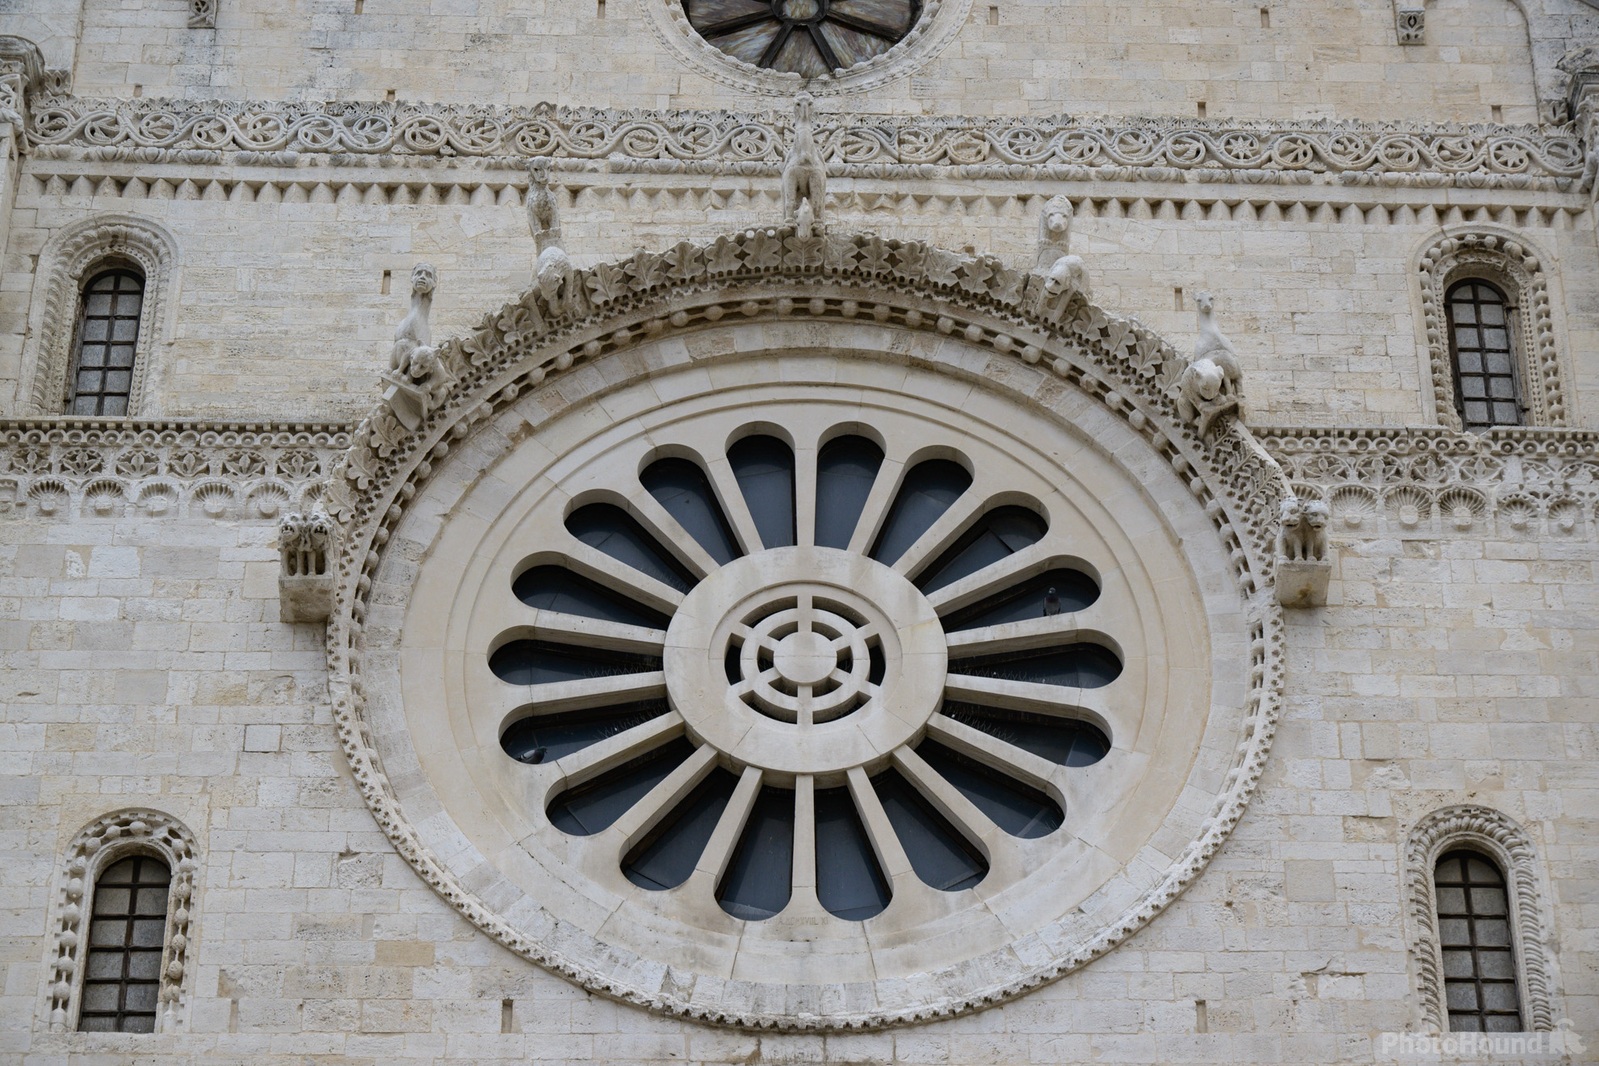 Image of Bari Cathedral by Luka Esenko